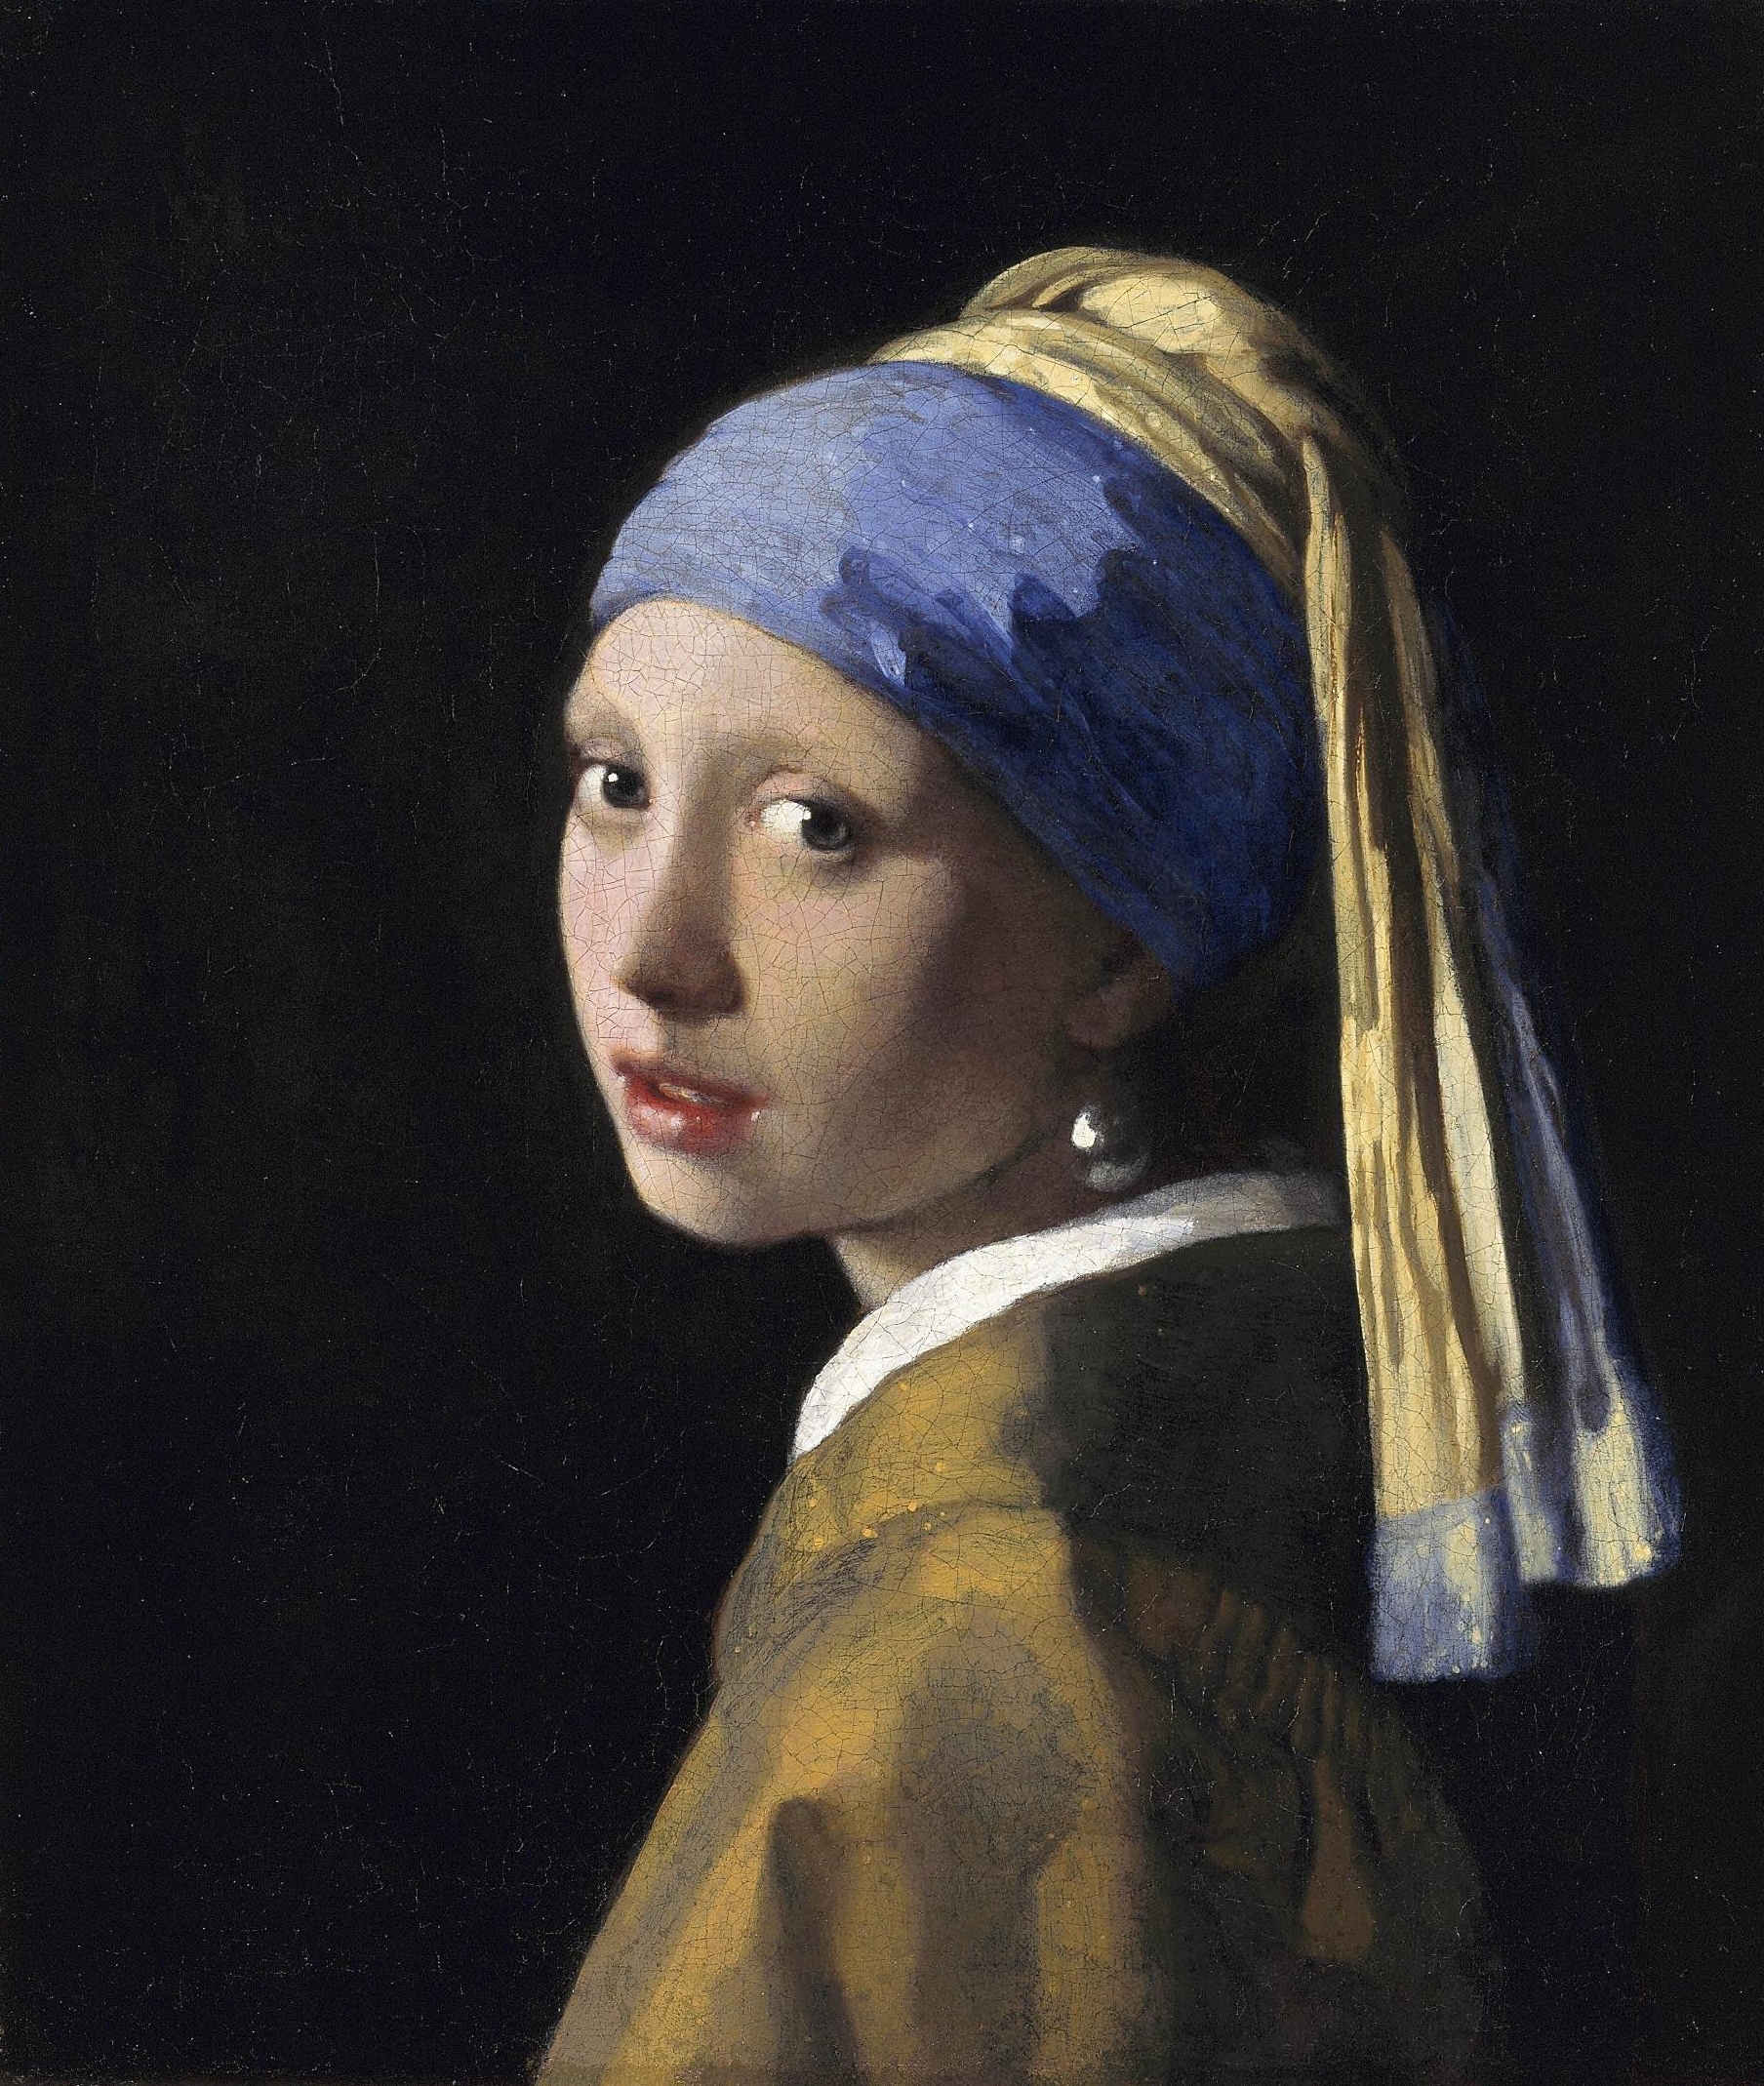 A girl wearing a pearl earring staring back at the viewer